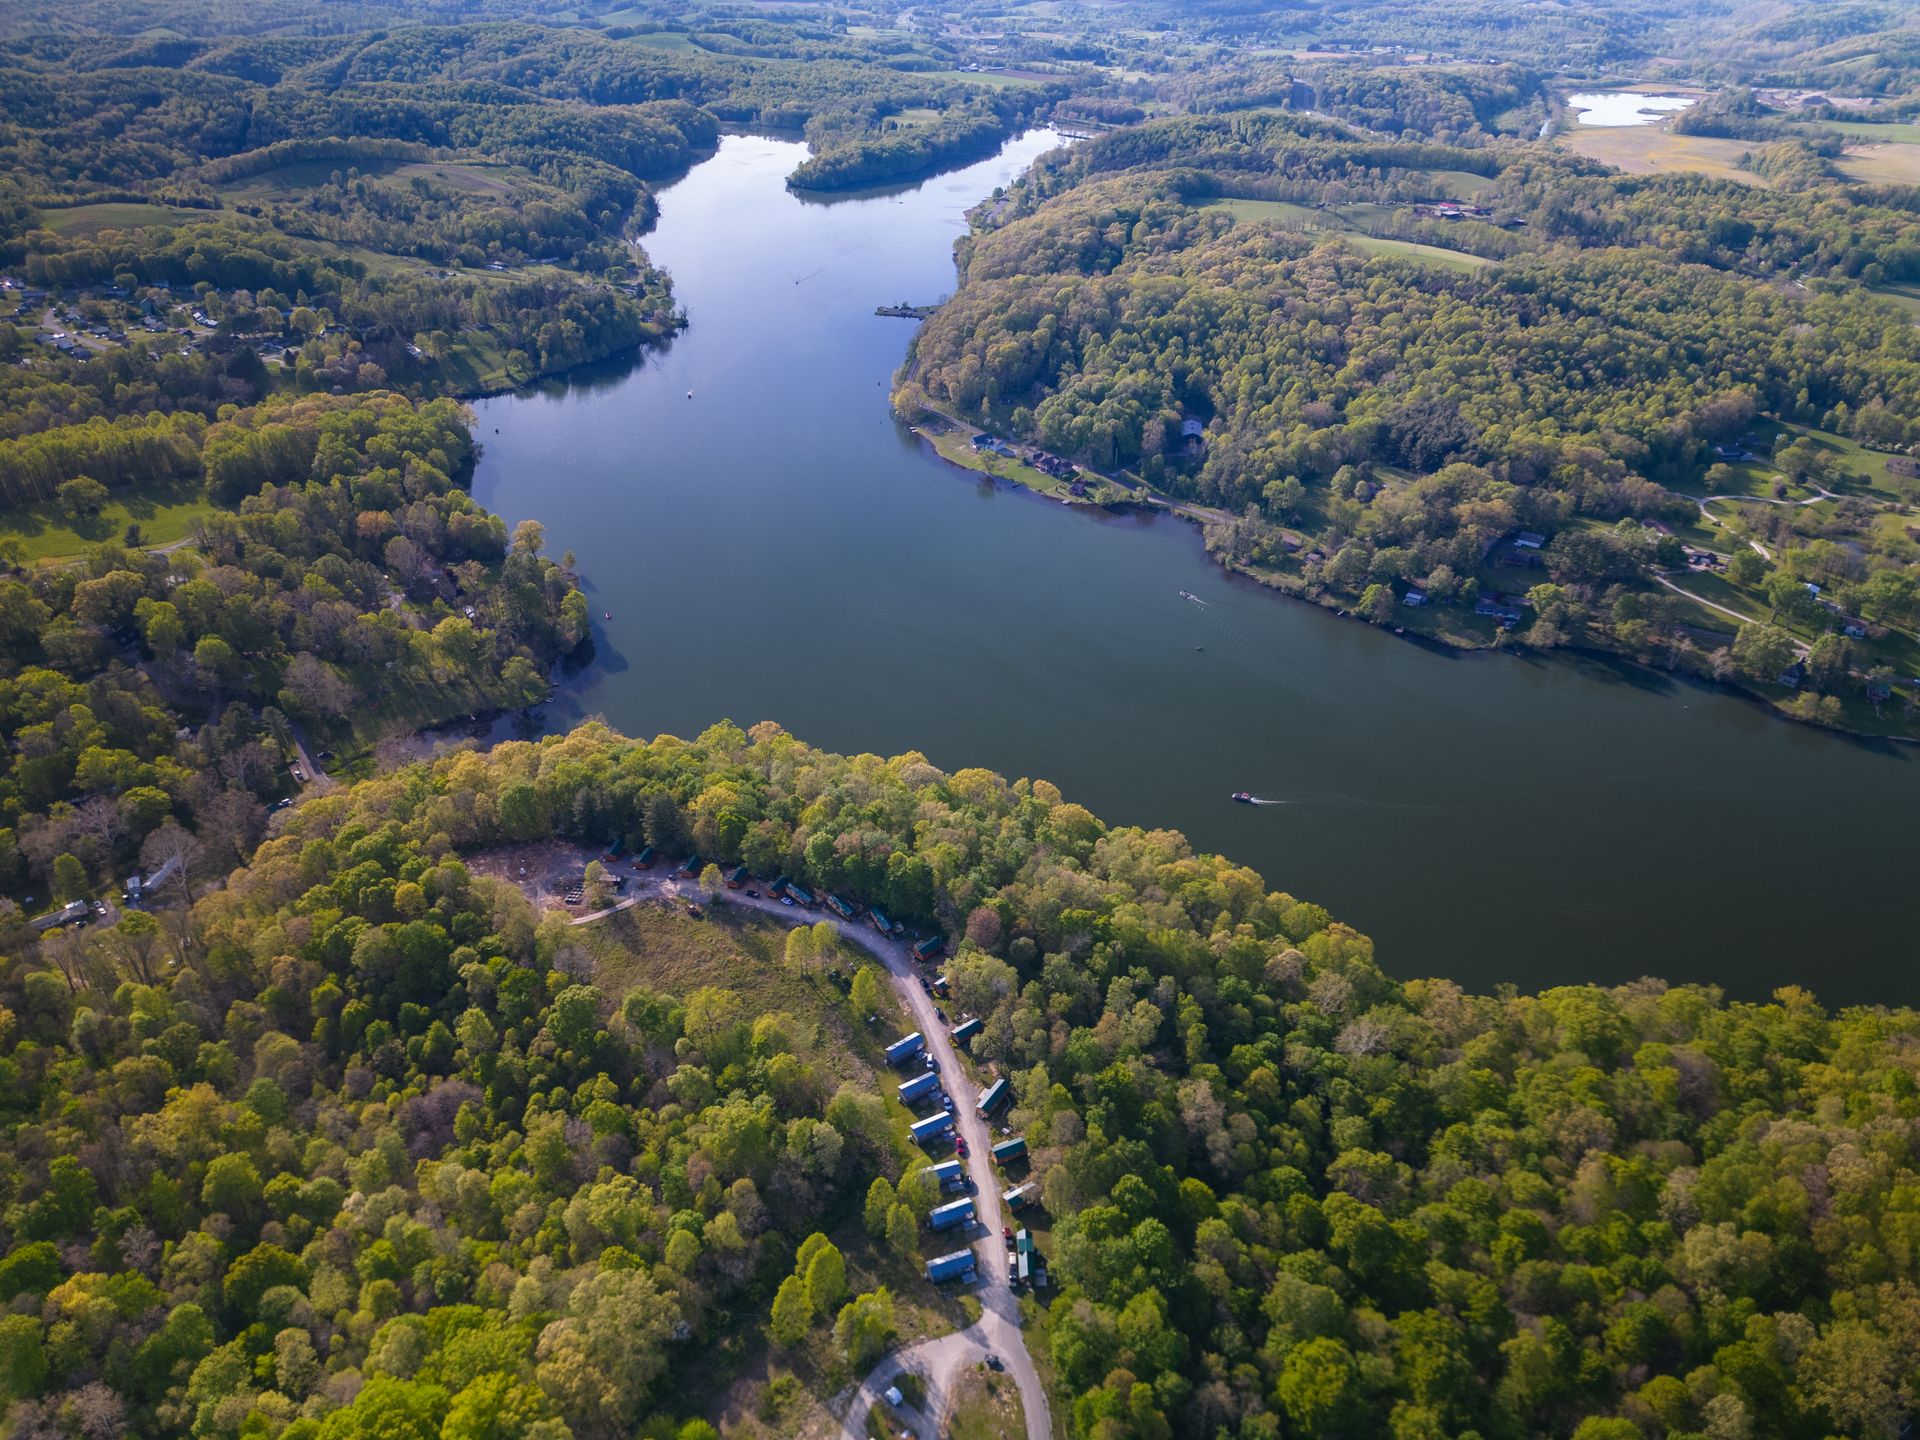 an aerial view of a lake logan surrounded by trees and a campground